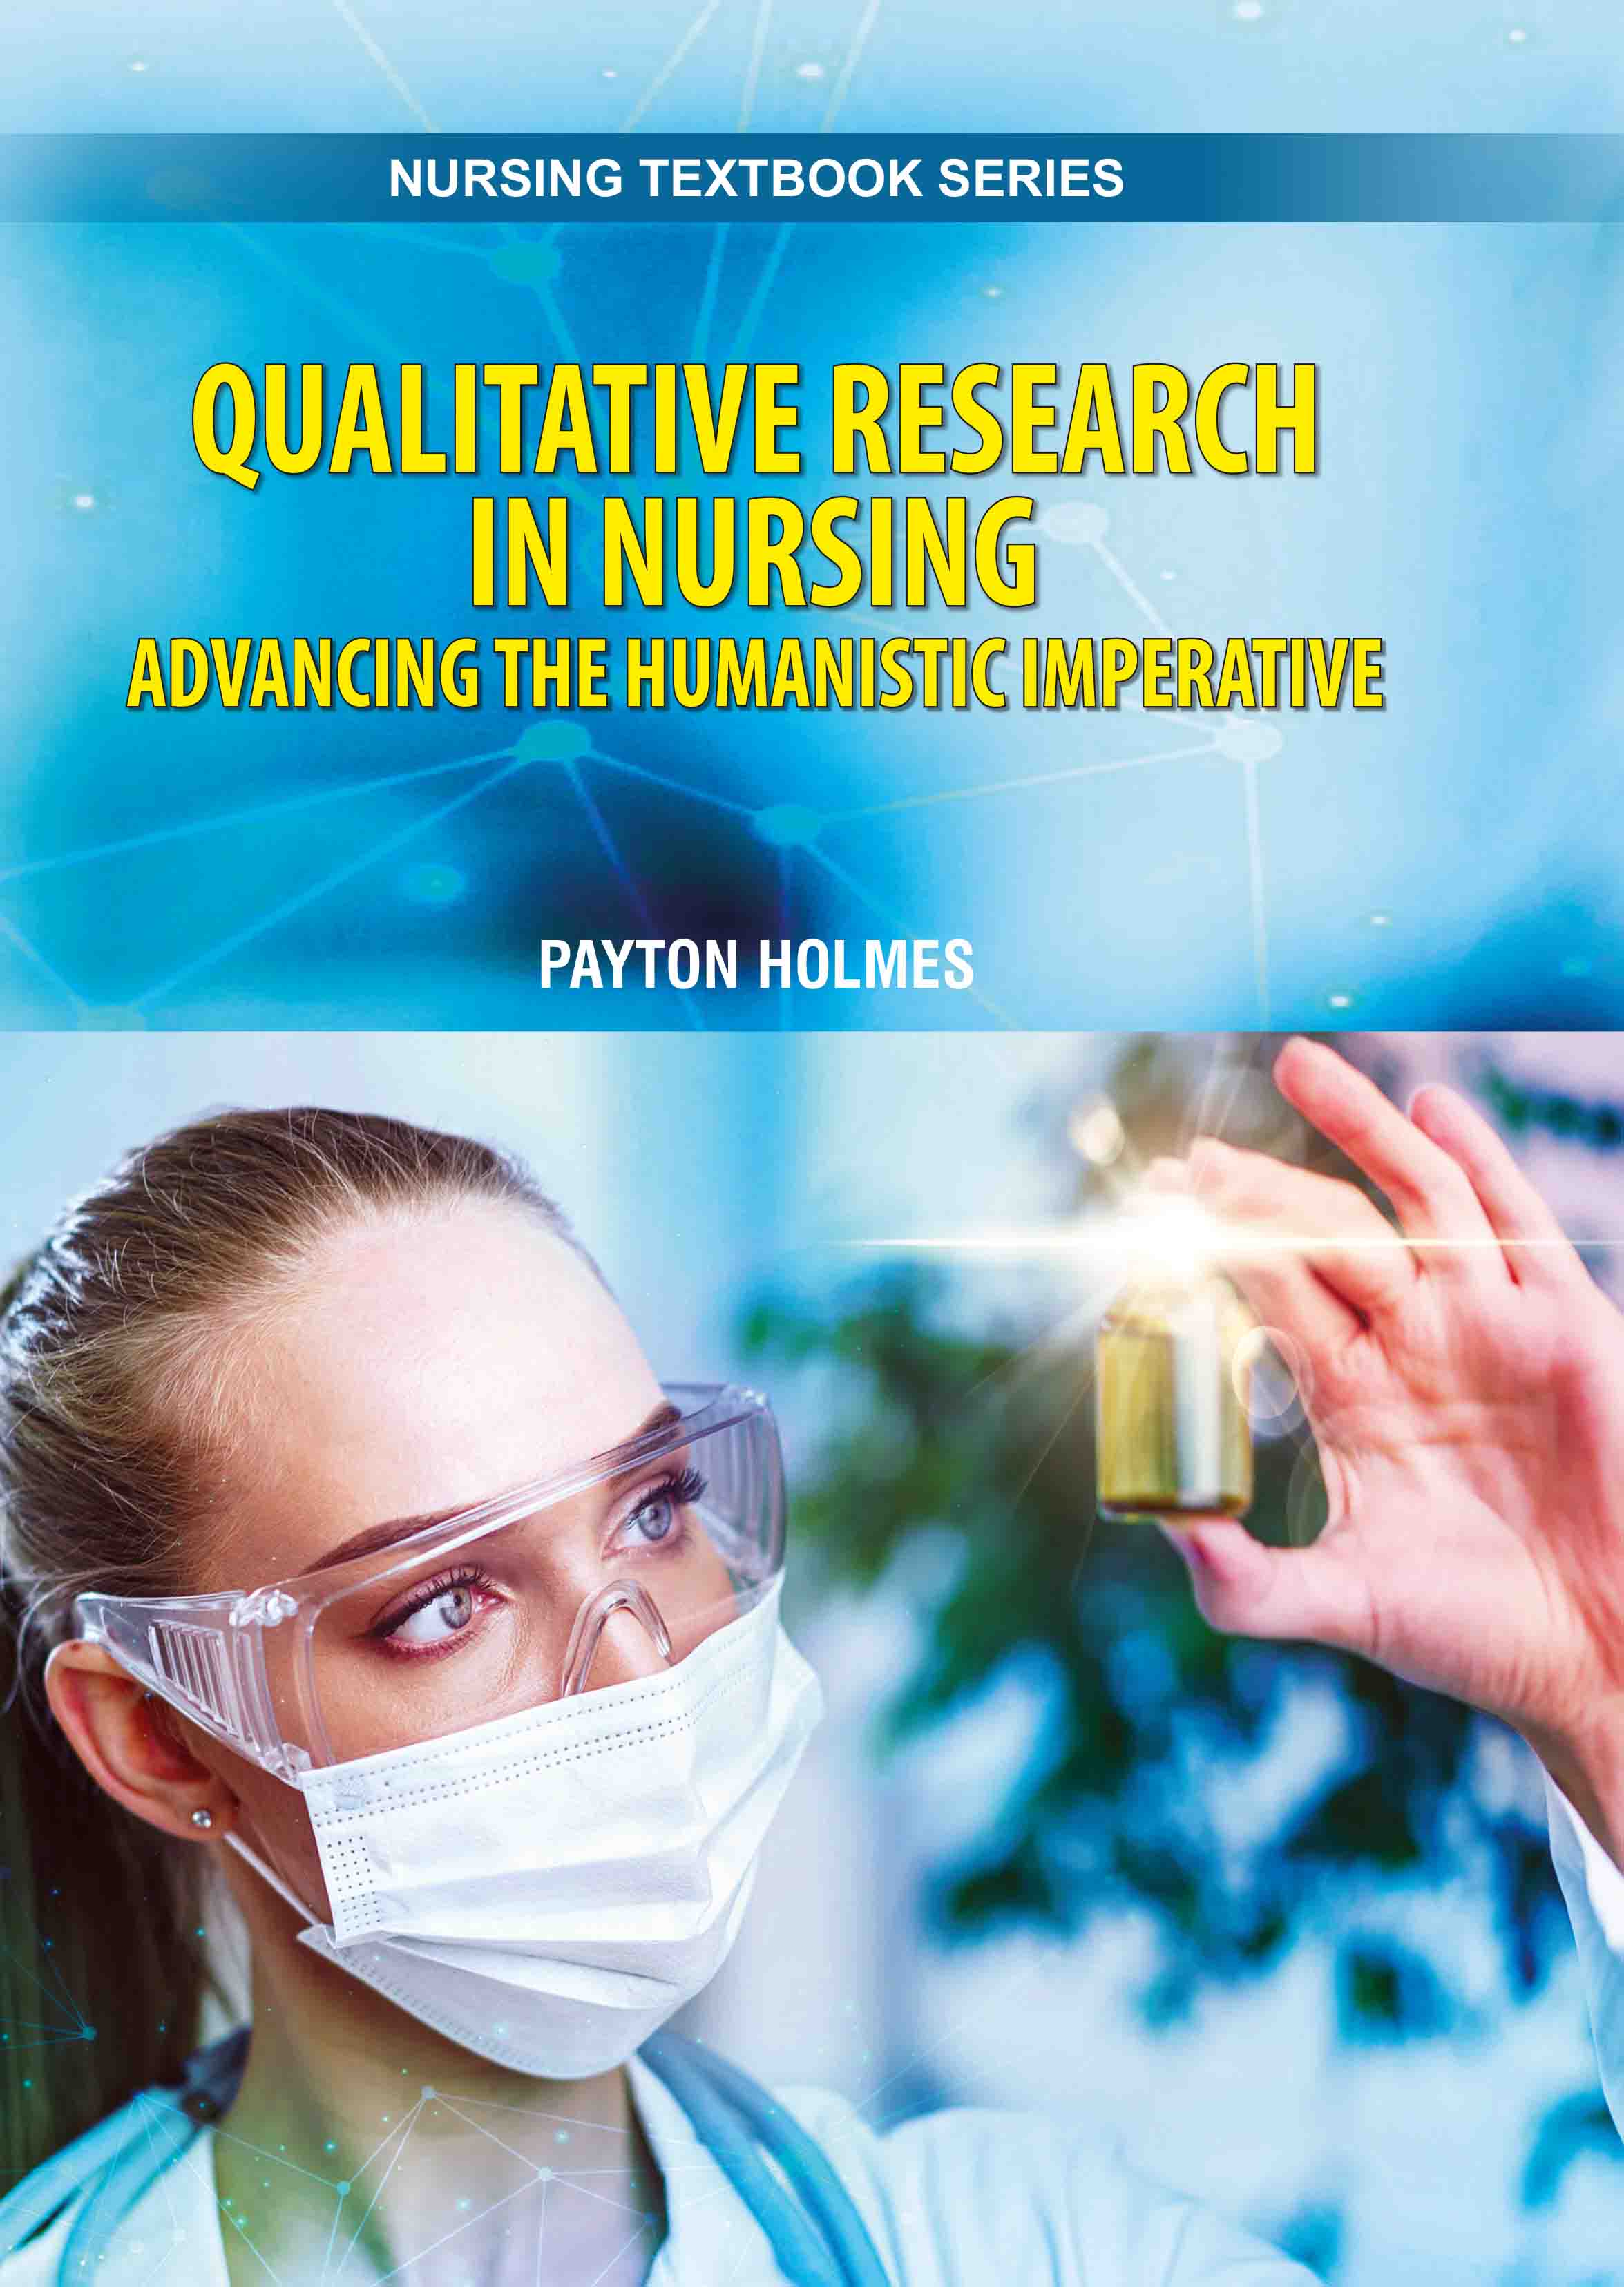 Qualitative Research in Nursing: Advancing the Humanistic Imperative